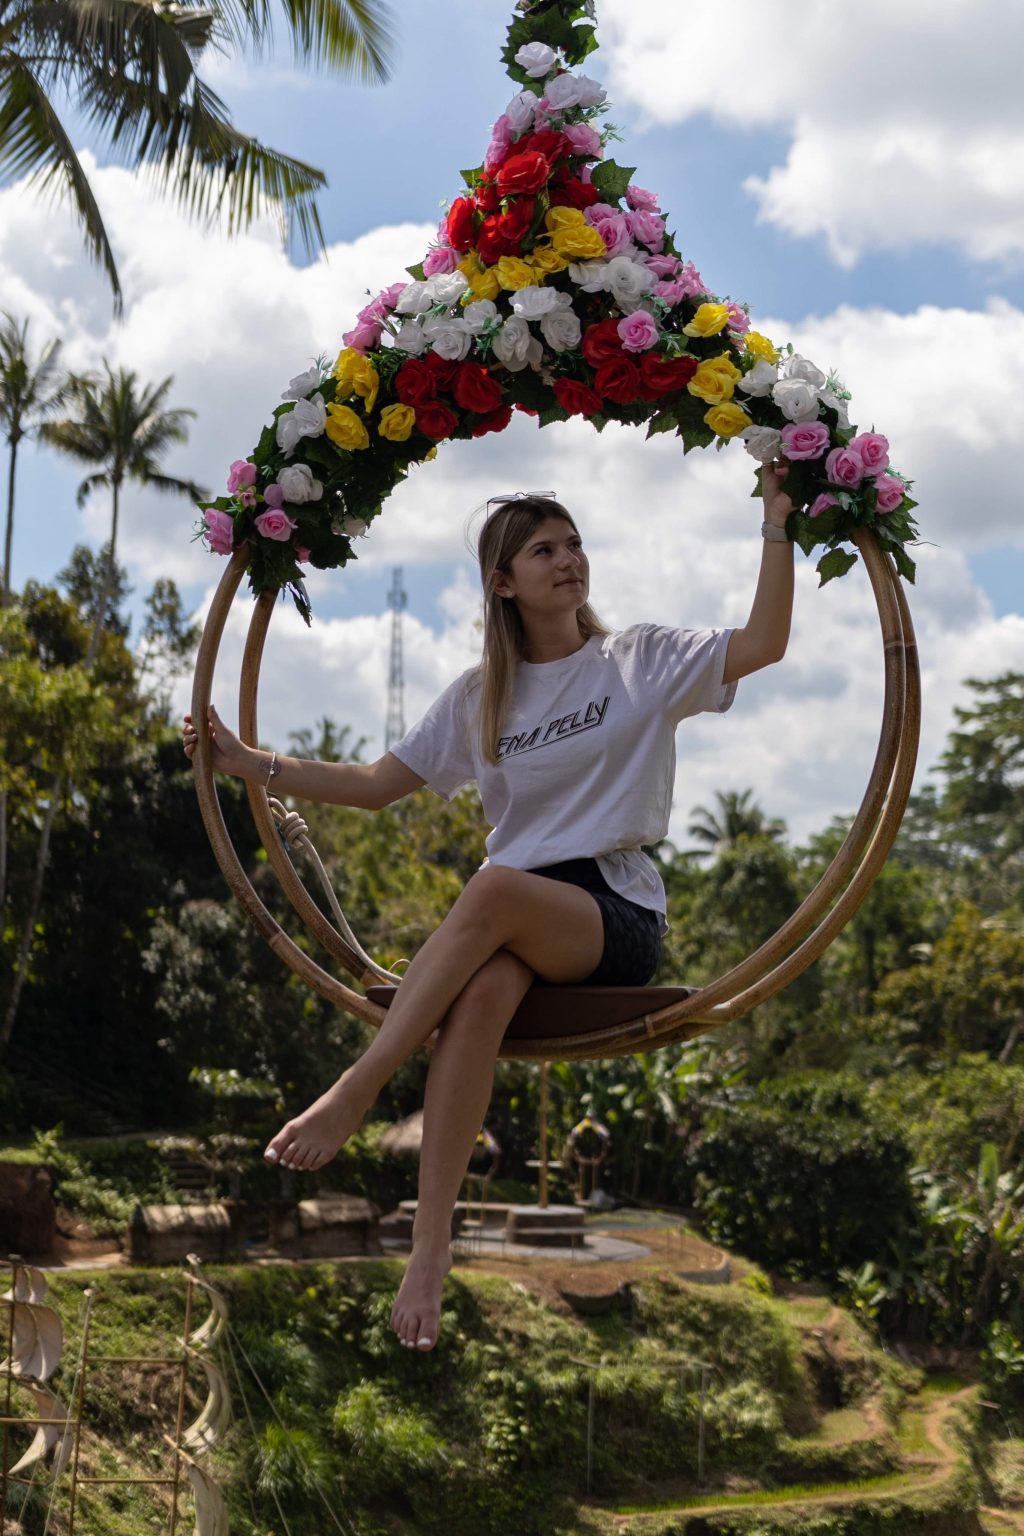 Photograph of a woman sitting on a flower swing in Bali, Indonesia